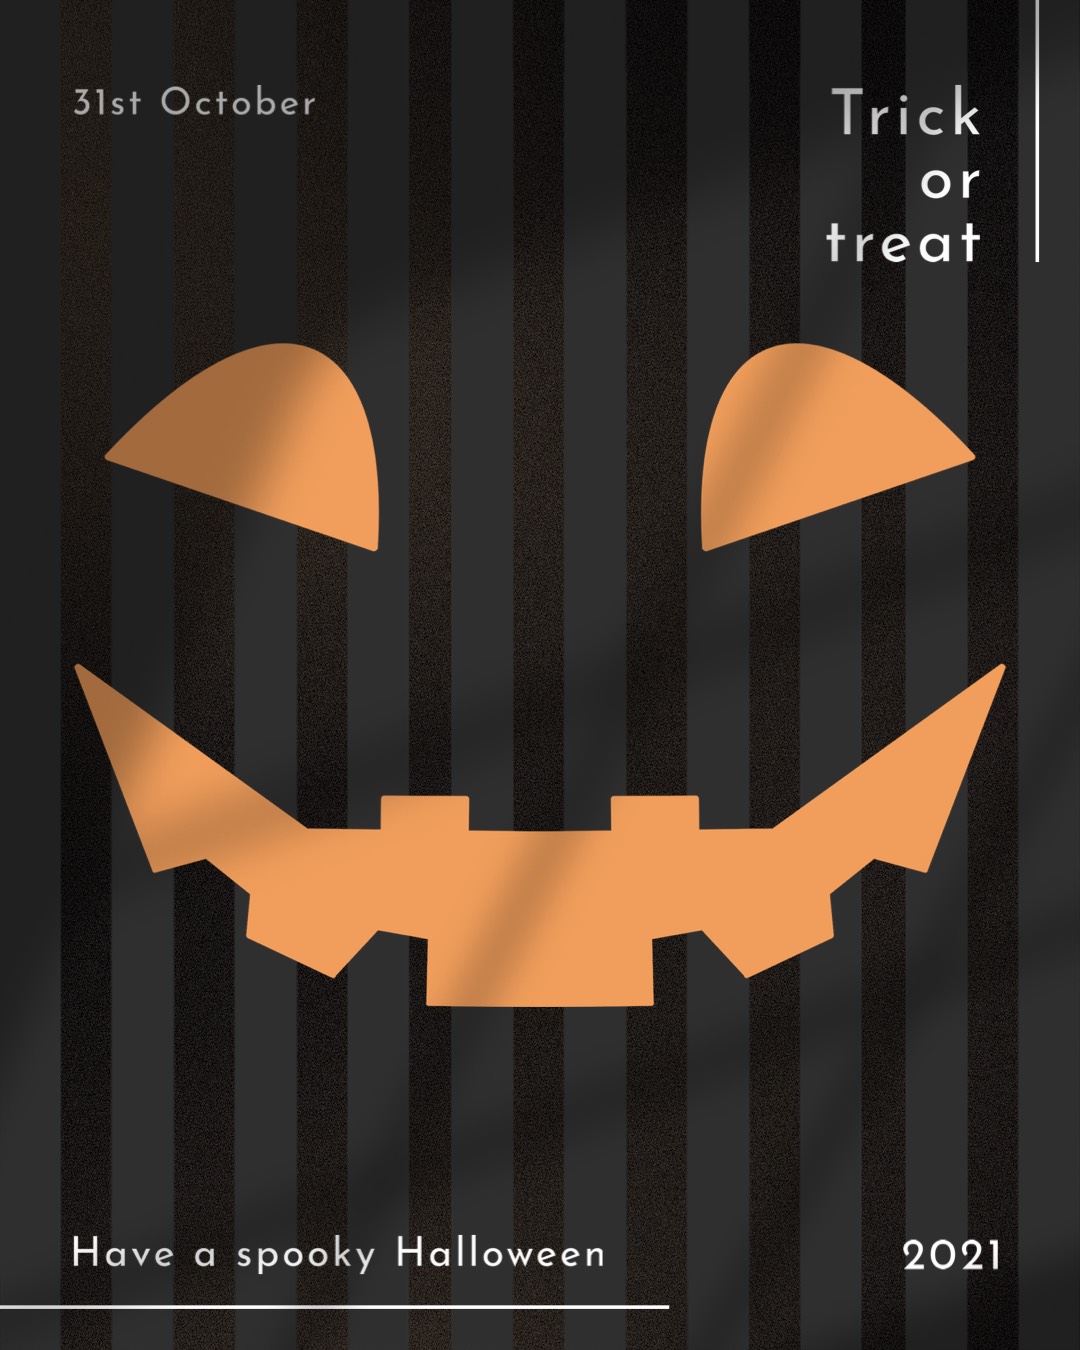 A Trick Or Treat Poster With A Jack - O - Lantern Face Halloween Template